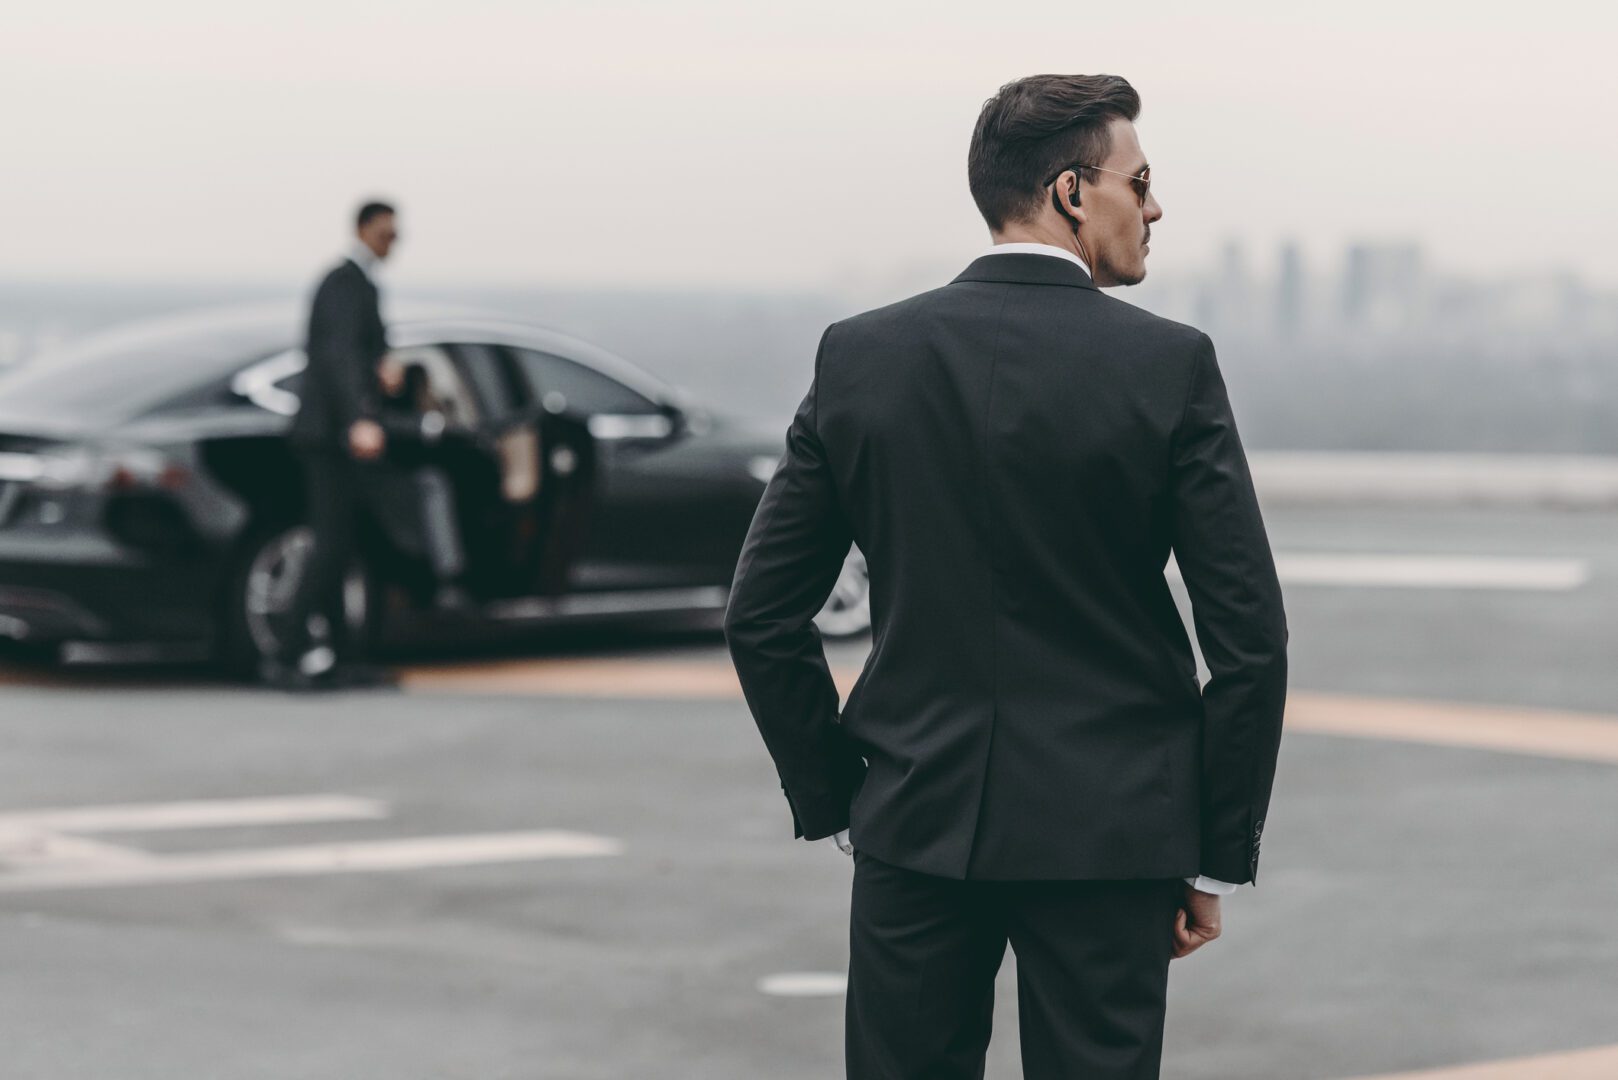 A man in a suit and tie standing next to a car.